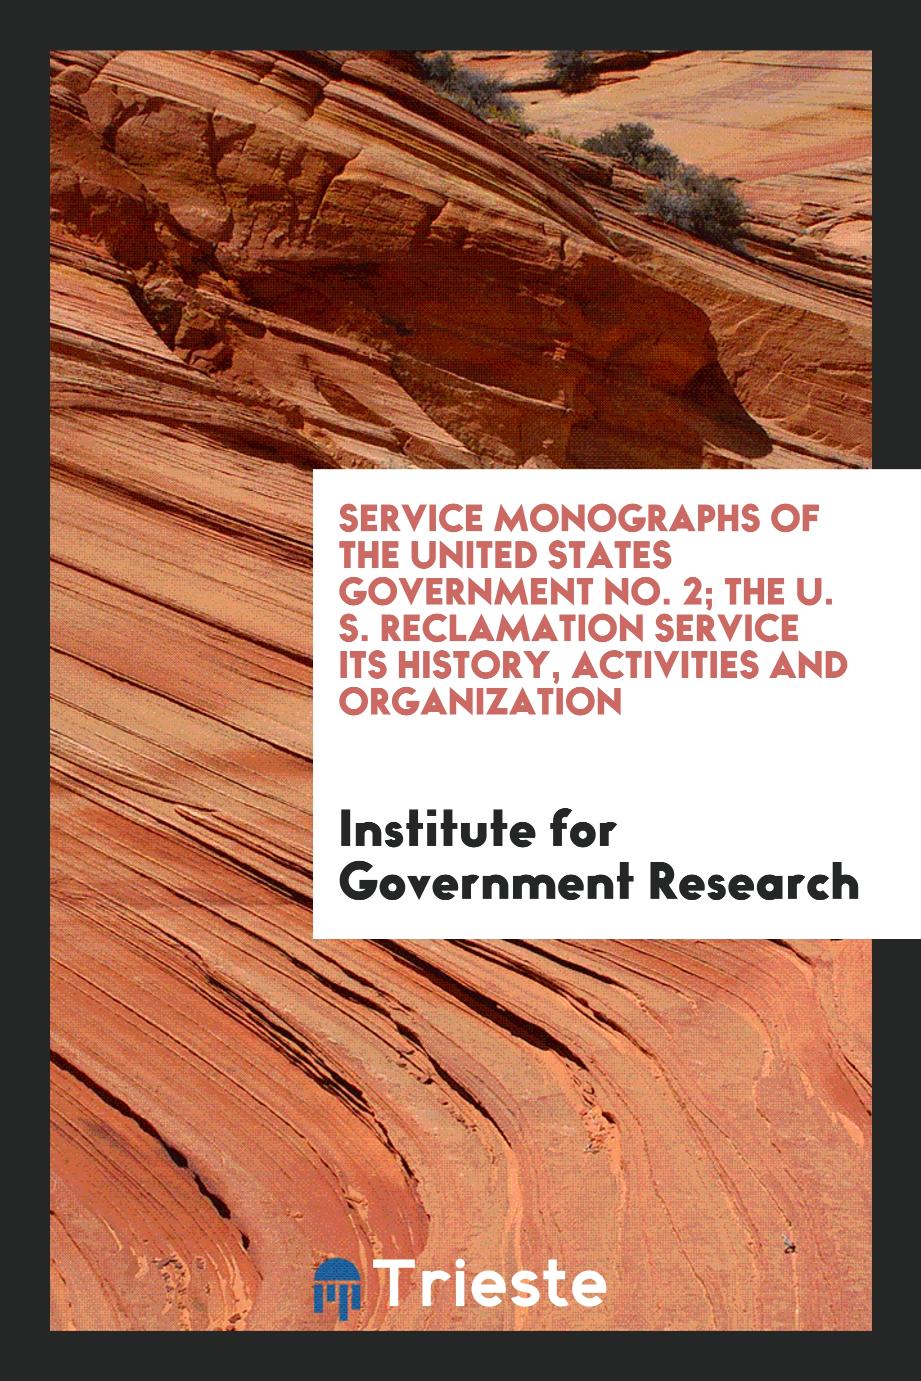 Service Monographs of the United States Government No. 2; The U. S. Reclamation Service Its History, Activities and Organization